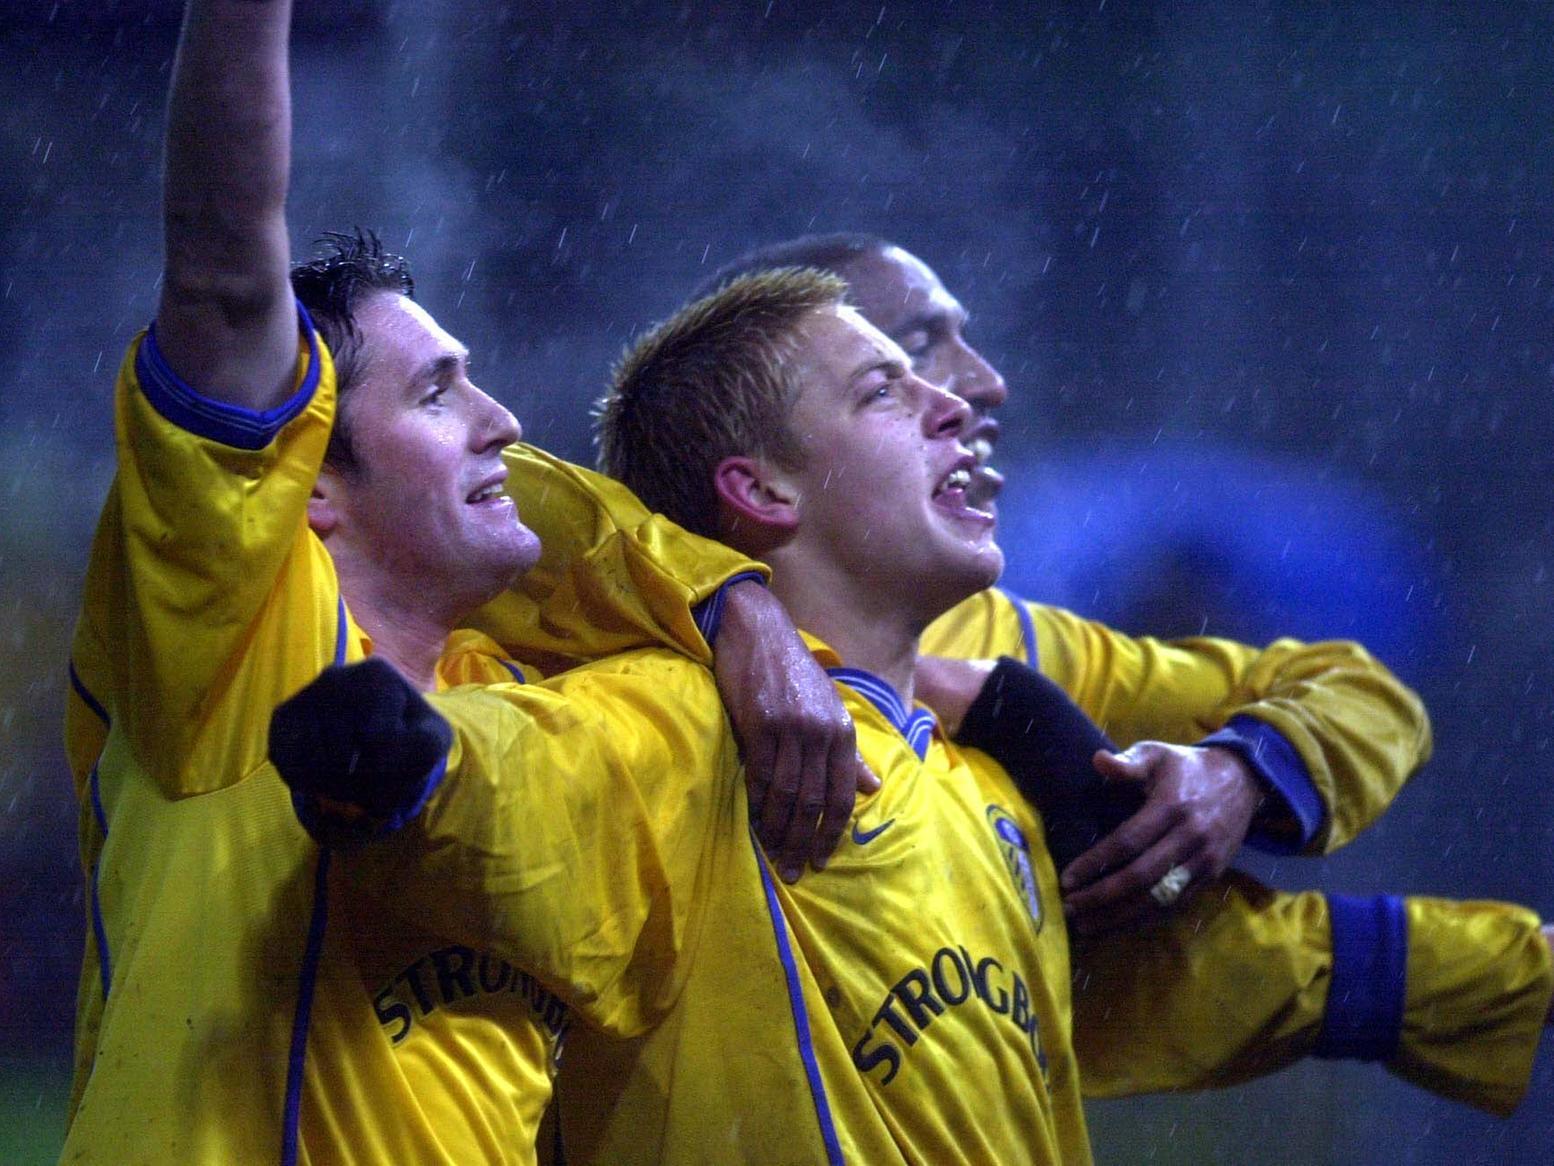 Share your memories of Leeds United's UEFA Cup campaigns with Andrew Hutchinson via email at: andrew.hutchinson@jpress.co.uk or tweet him - @AndyHutchYPN